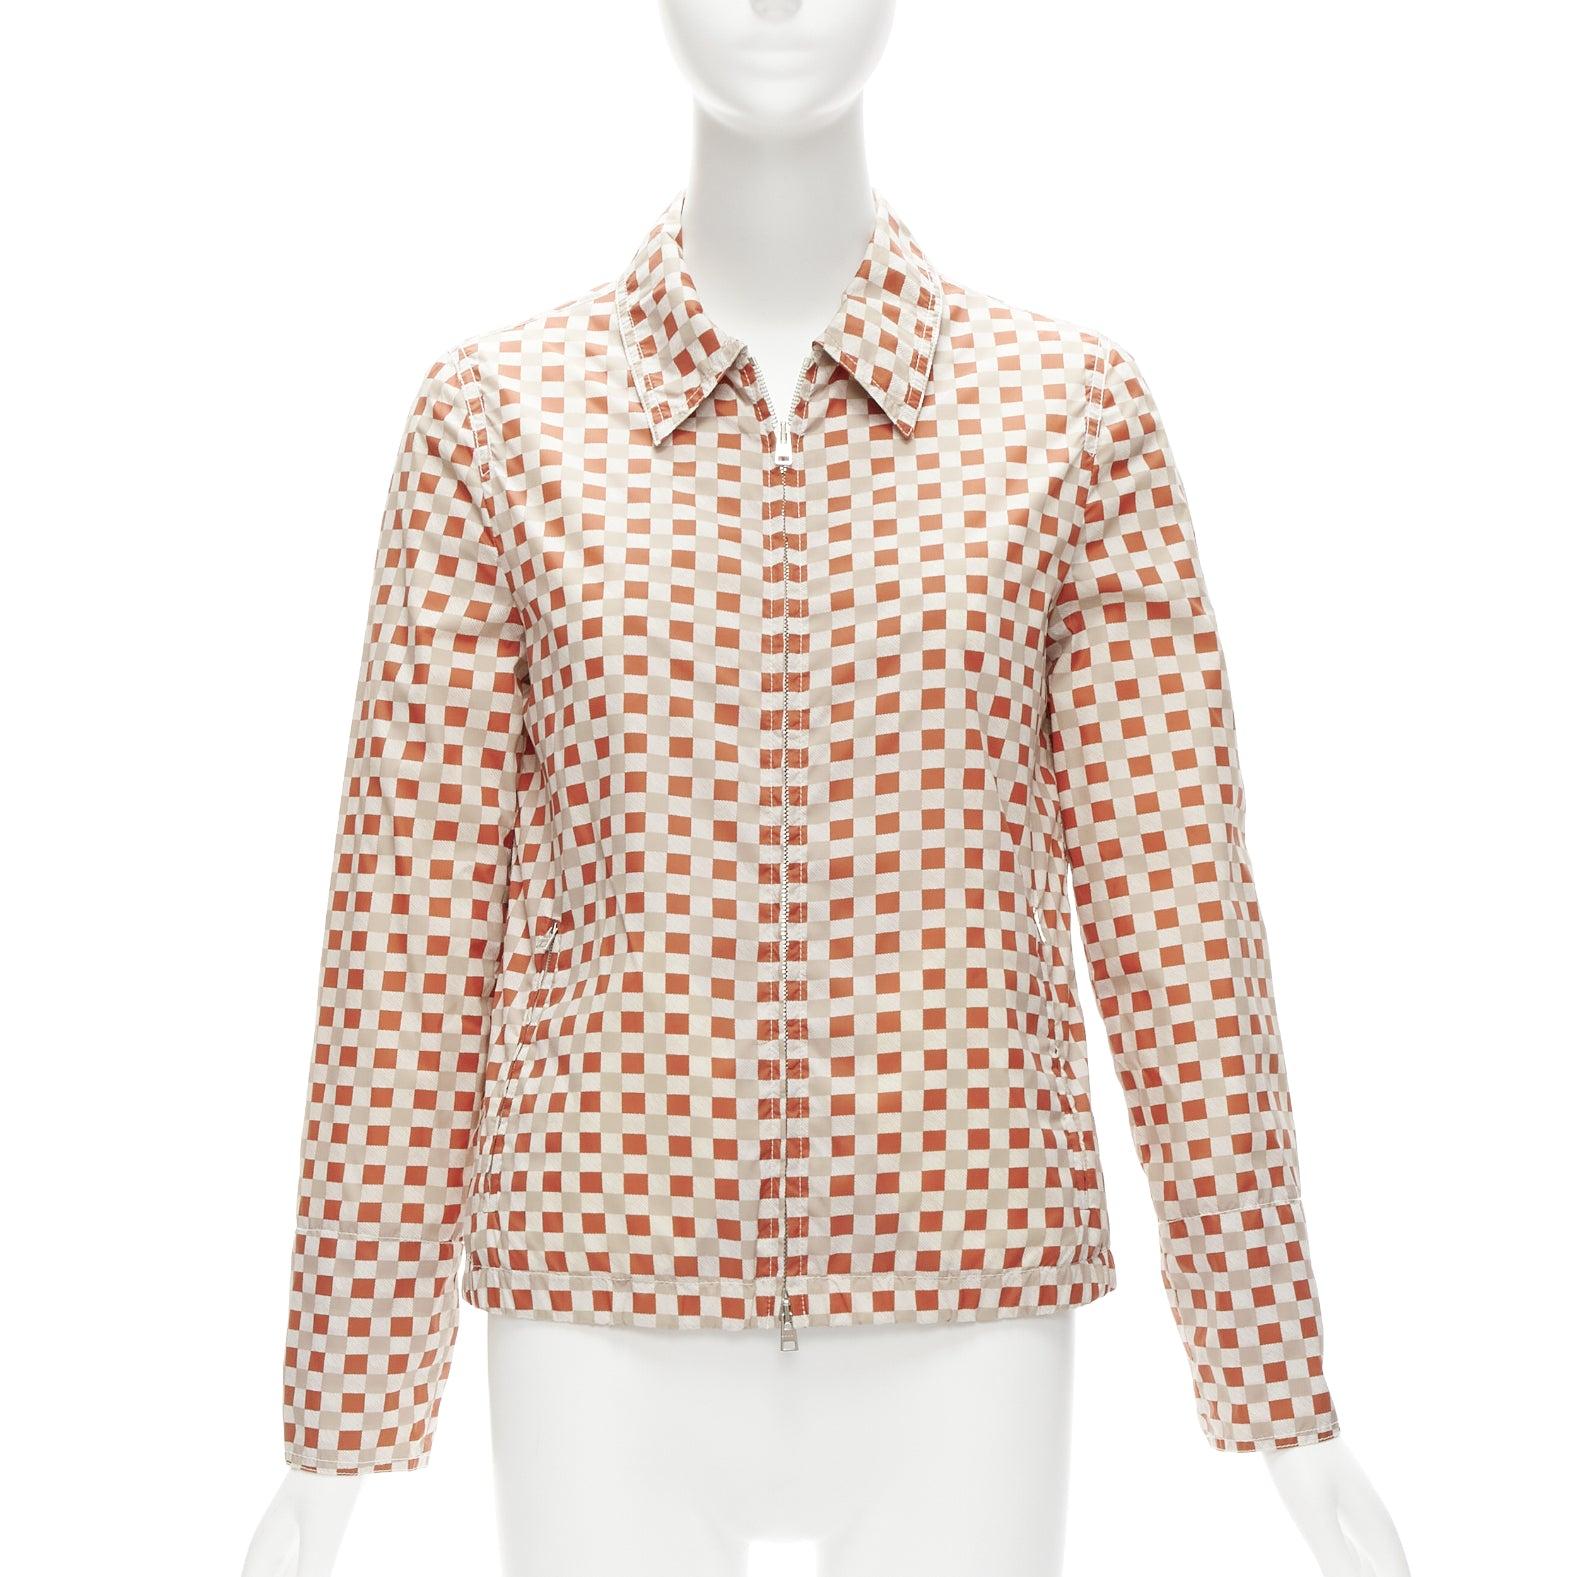 MARNI red beige checkerboard collared zip shell jacket IT38 XS
Reference: CELG/A00247
Brand: Marni
Material: Polyamide
Color: Red, Khaki
Pattern: Checkered
Closure: Zip
Lining: White Fabric
Extra Details: 2 pockets at front.
Made in: